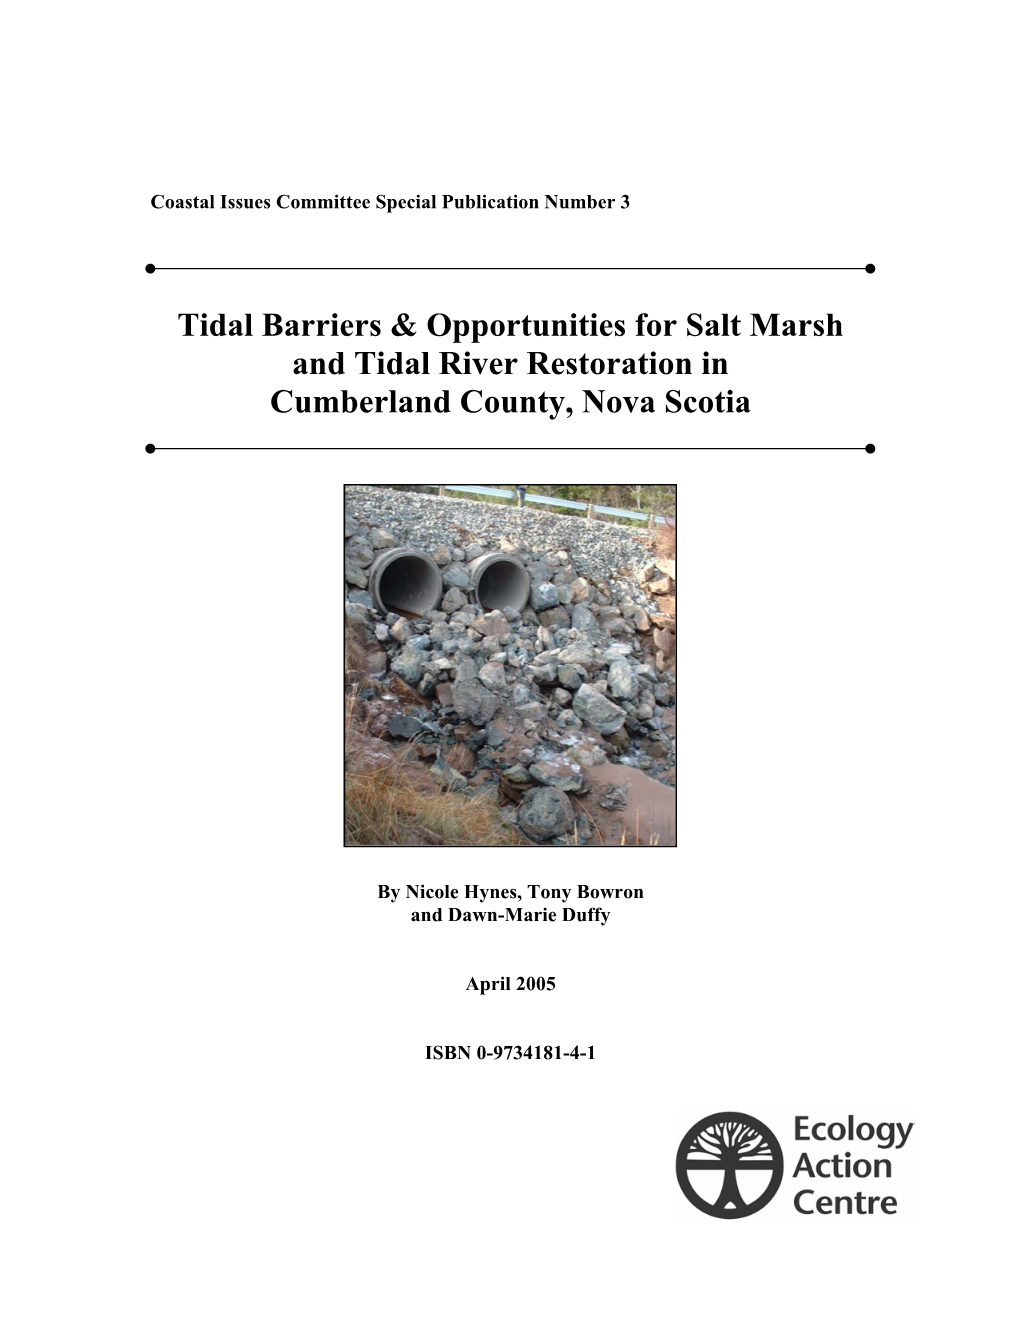 Tidal Barriers & Opportunities for Salt Marsh and Tidal River Restoration in Cumberland County, Nova Scotia